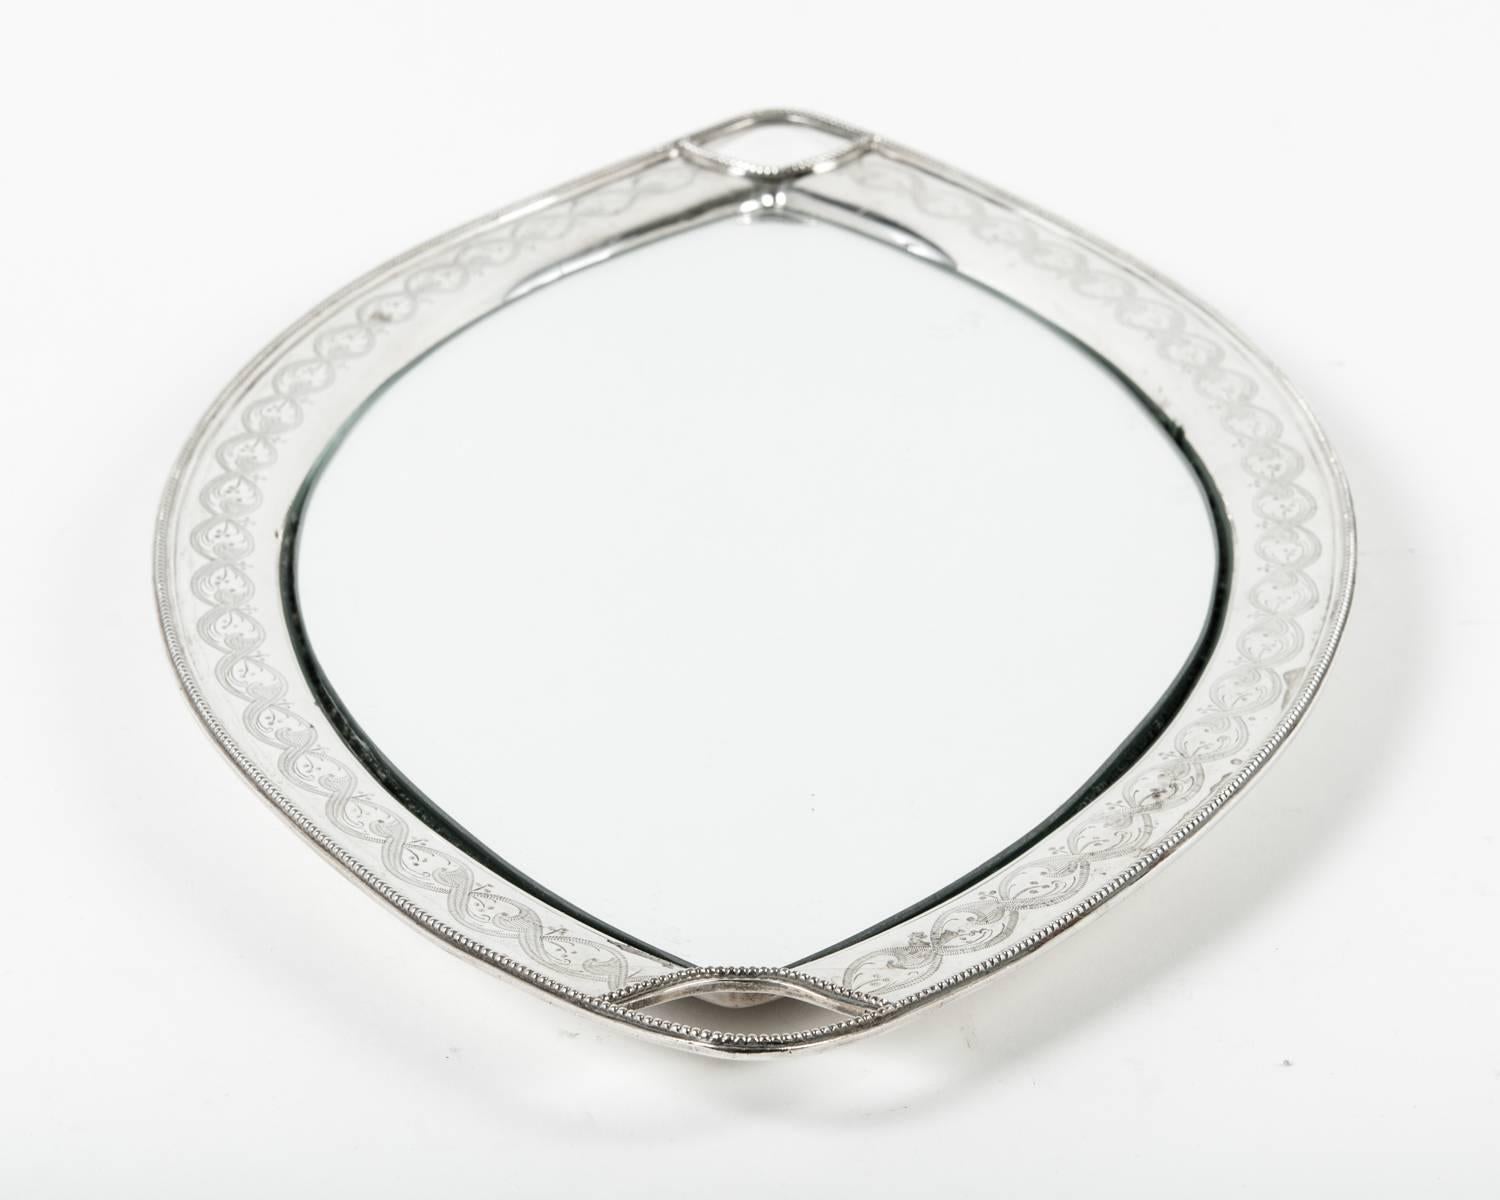 Early 20th Century Antique Footed English Silver Plate Oval Tray with Mirror Insert